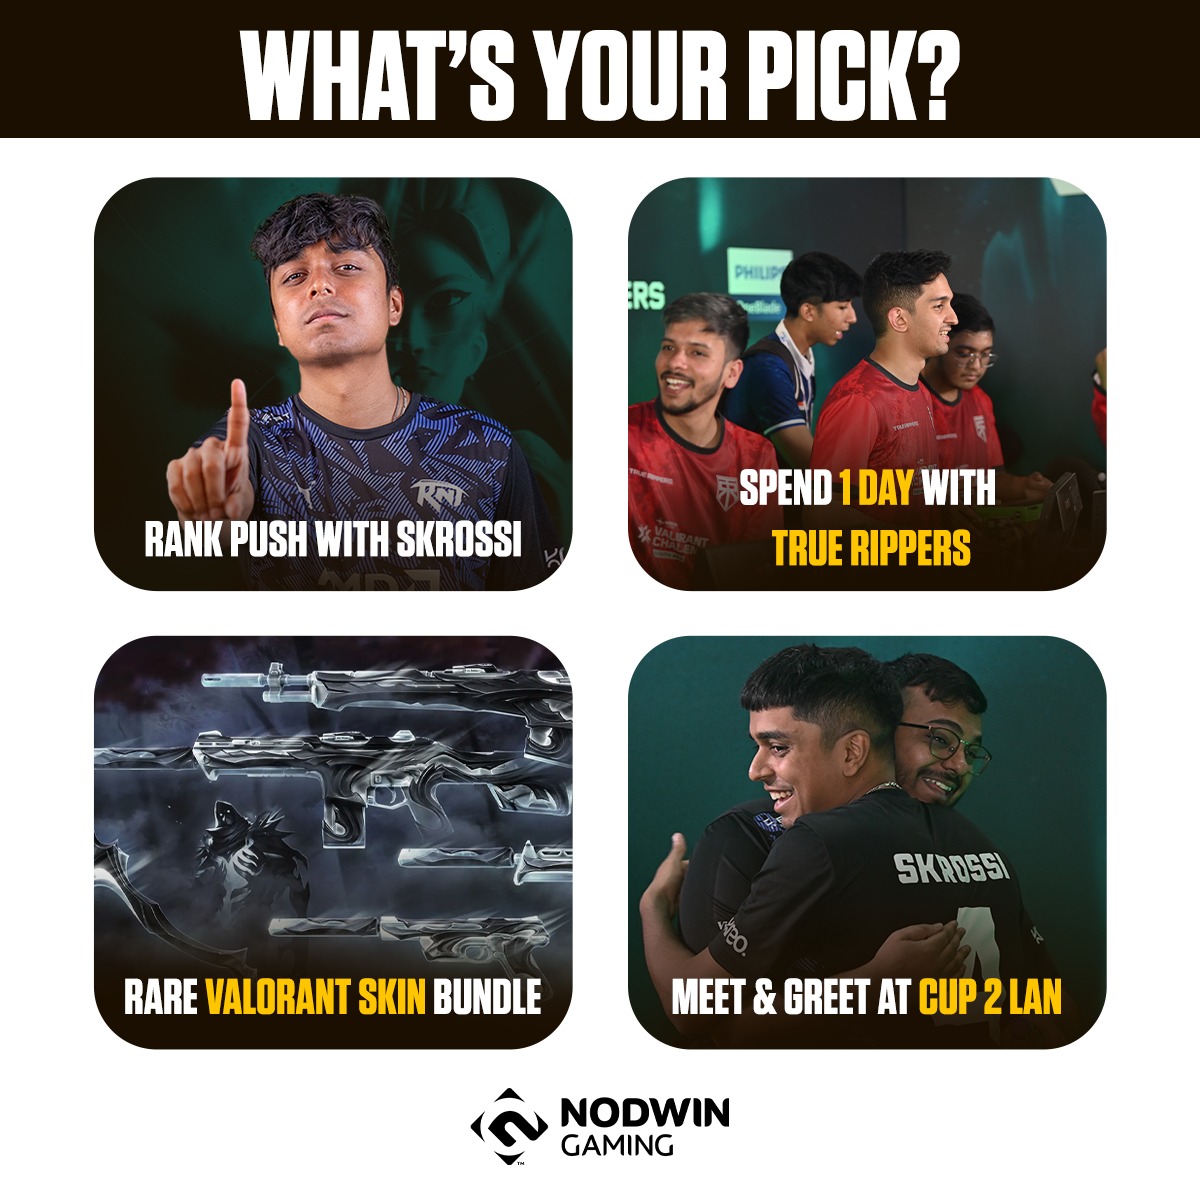 Four doors, four destinies. Which key will you choose to unlock your adventure?
Comment below!
.
.
#PickOne #Pickyourfav #commentbelow #NodwinGaming #Gaming #epsorts #indianesports #valorant #valorantgaming #india #valorantindia